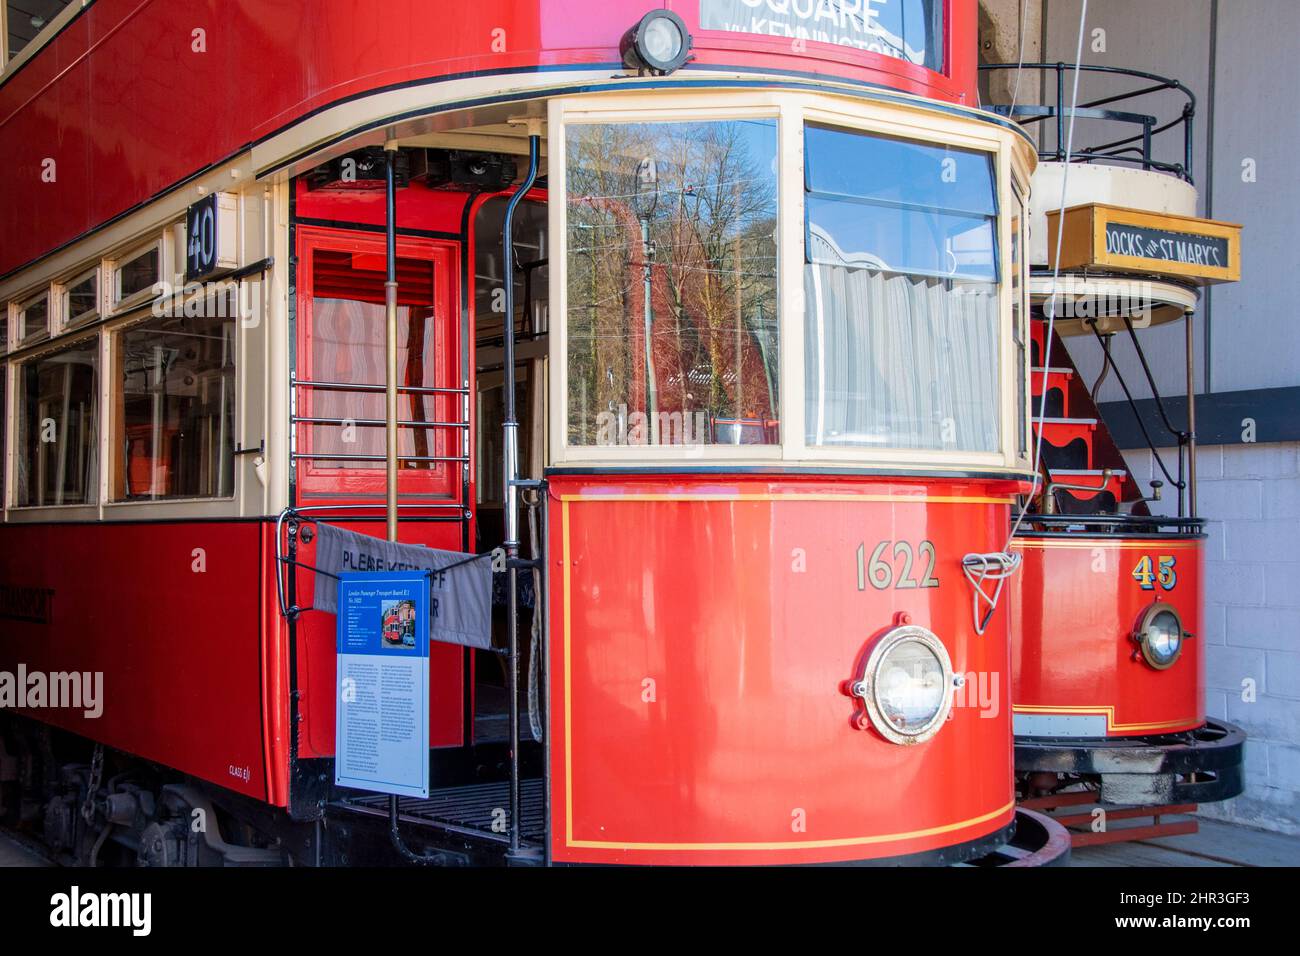 Derbyshire, UK – 5 April 2018: A vintage tram stored in the vehicle garage at Crich Tramway Village, the national tram museum Stock Photo